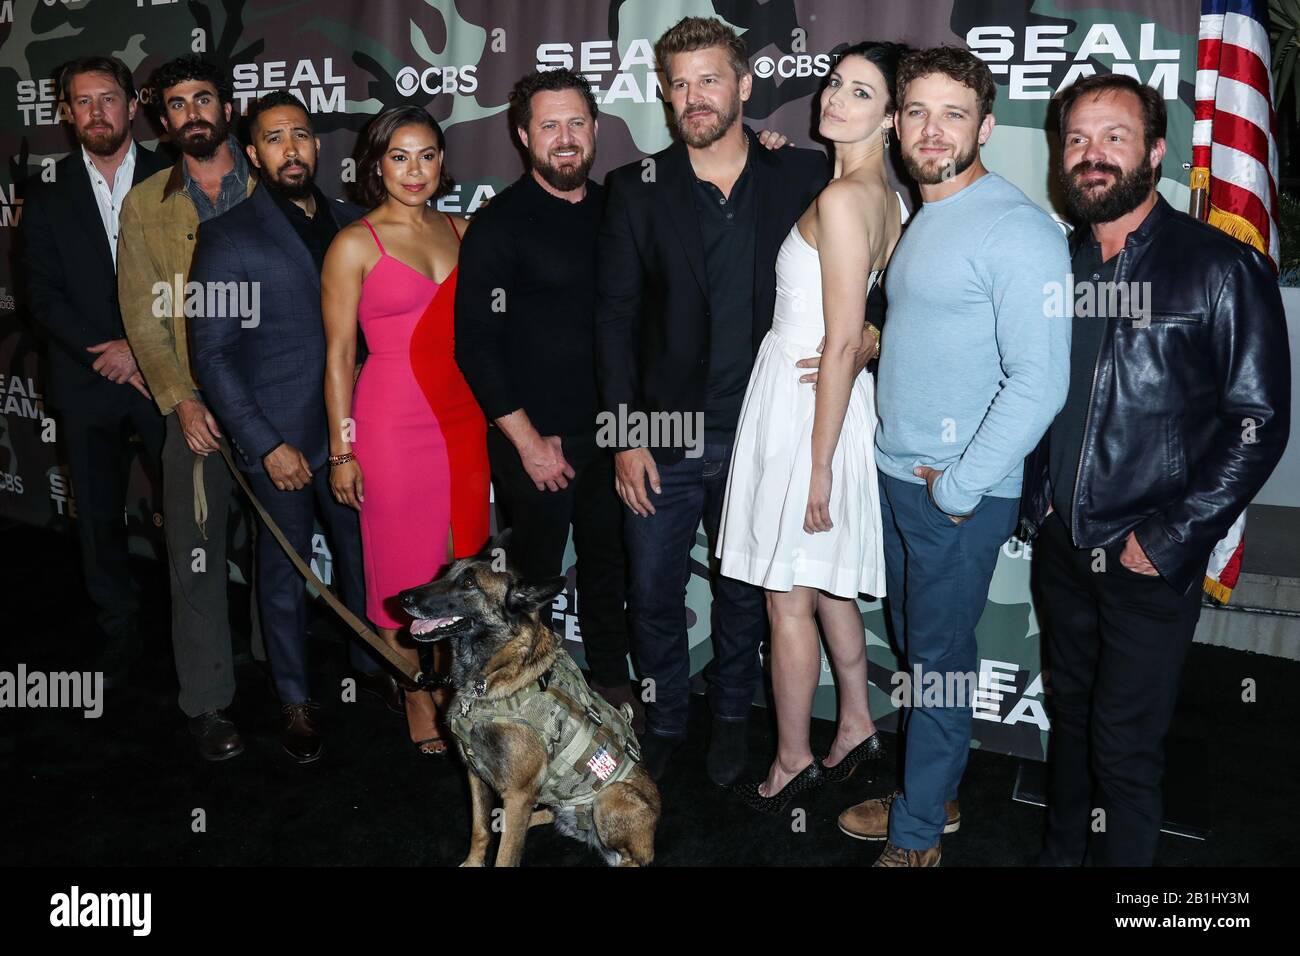 Hollywood, United States. 25th Feb, 2020. HOLLYWOOD, LOS ANGELES, CALIFORNIA, USA - FEBRUARY 25: Justin Melnick, Neil Brown Jr., Toni Trucks, AJ Buckley, David Boreanaz, Jessica Pare, Max Thieriot and Judd Lormand arrive at the Los Angeles Premiere Of CBS Television Studios' 'SEAL Team' held at ArcLight Cinemas Hollywood on February 25, 2020 in Hollywood, Los Angeles, California, United States. (Photo by Xavier Collin/Image Press Agency) Credit: Image Press Agency/Alamy Live News Stock Photo